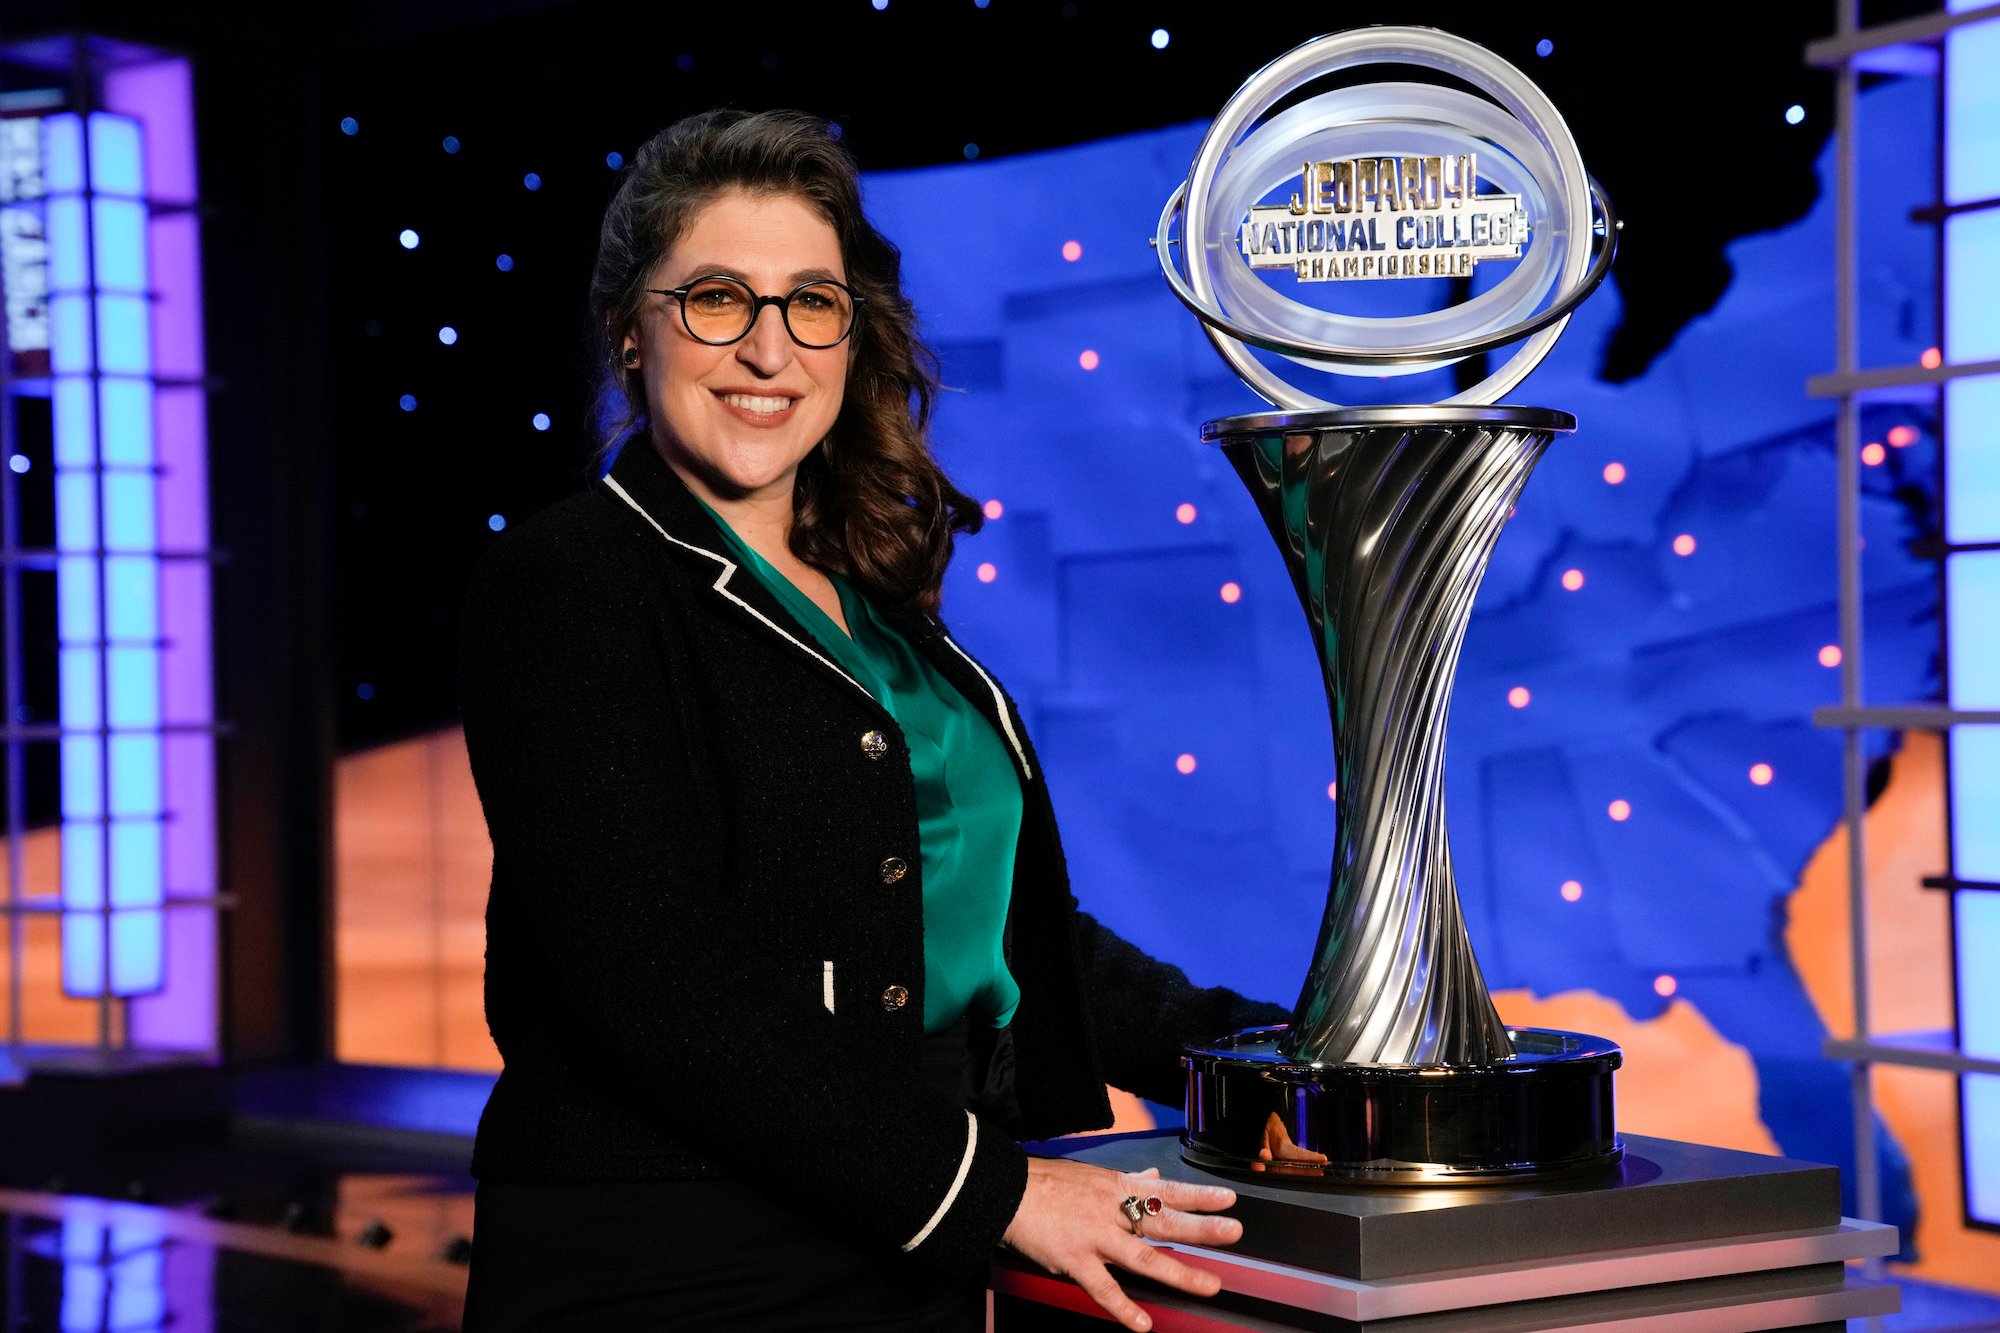 'Jeopardy!' host Mayim Bialik poses with the college trophy